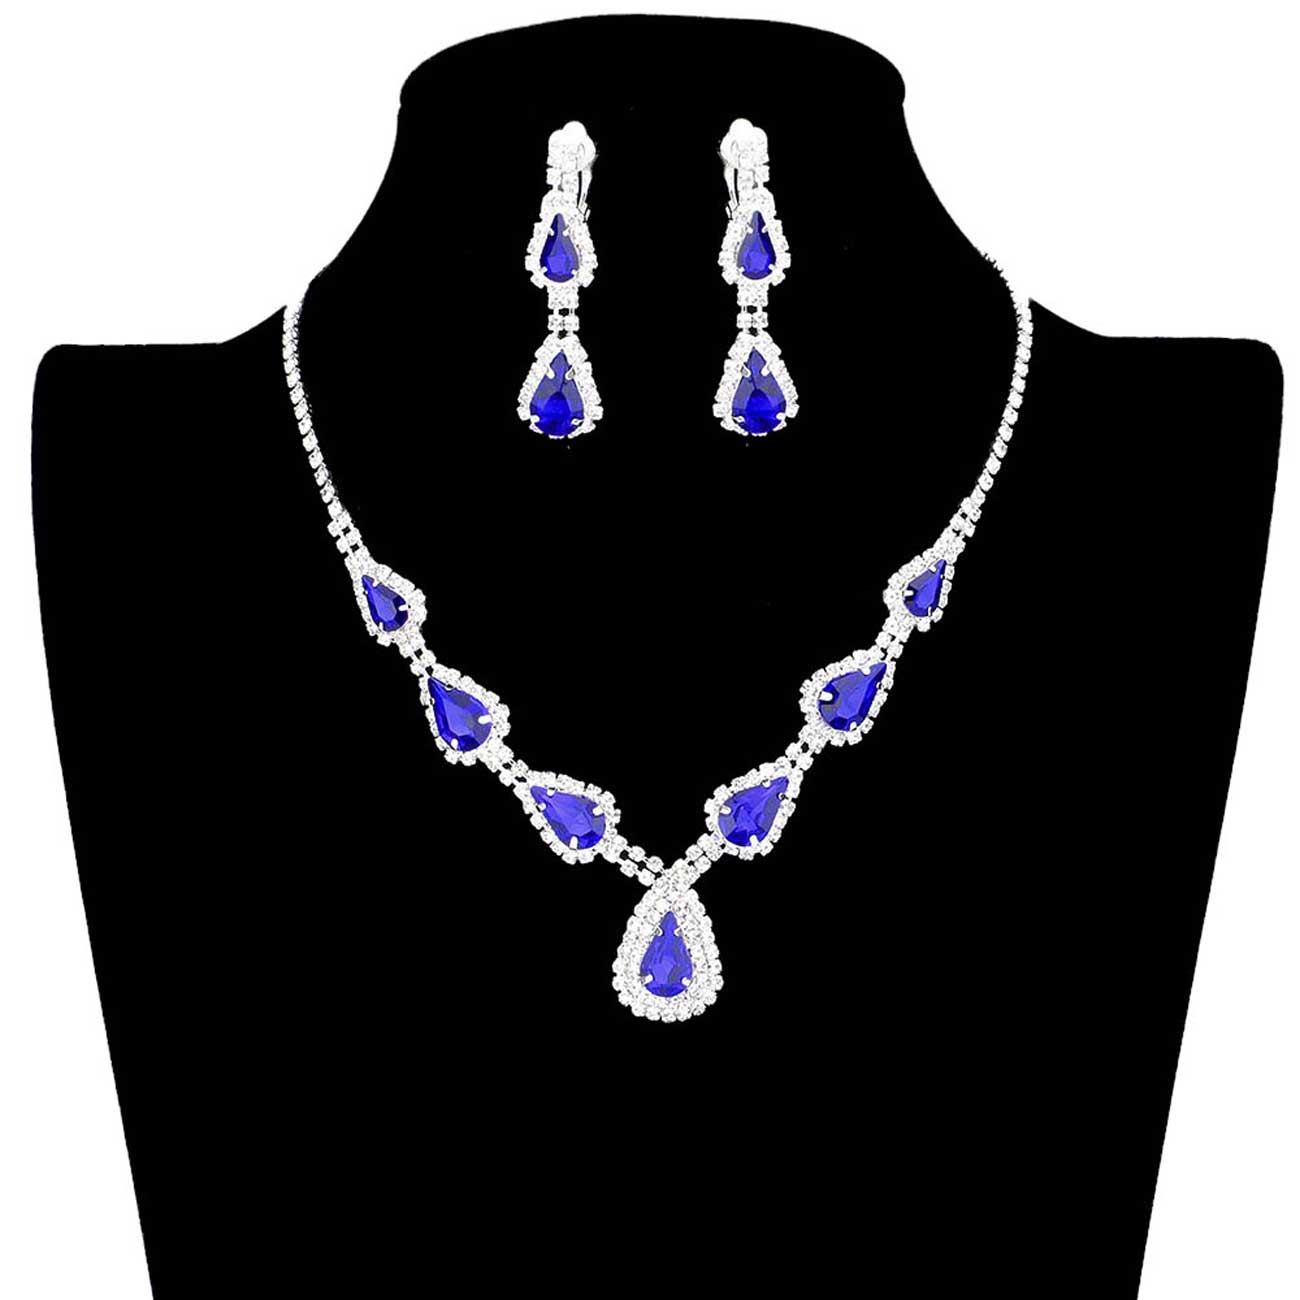 Sapphire Teardrop Stone Accented Rhinestone Pave Necklace, brings a gorgeous glow to your outfit to show off the royalty on any special occasion. These gorgeous Rhinestone pieces will show your class in any special occasion. The elegance of these Rhinestone goes unmatched, great for wearing at a party! Perfect jewelry to enhance your look. Awesome gift for birthday, Anniversary or any special occasion.